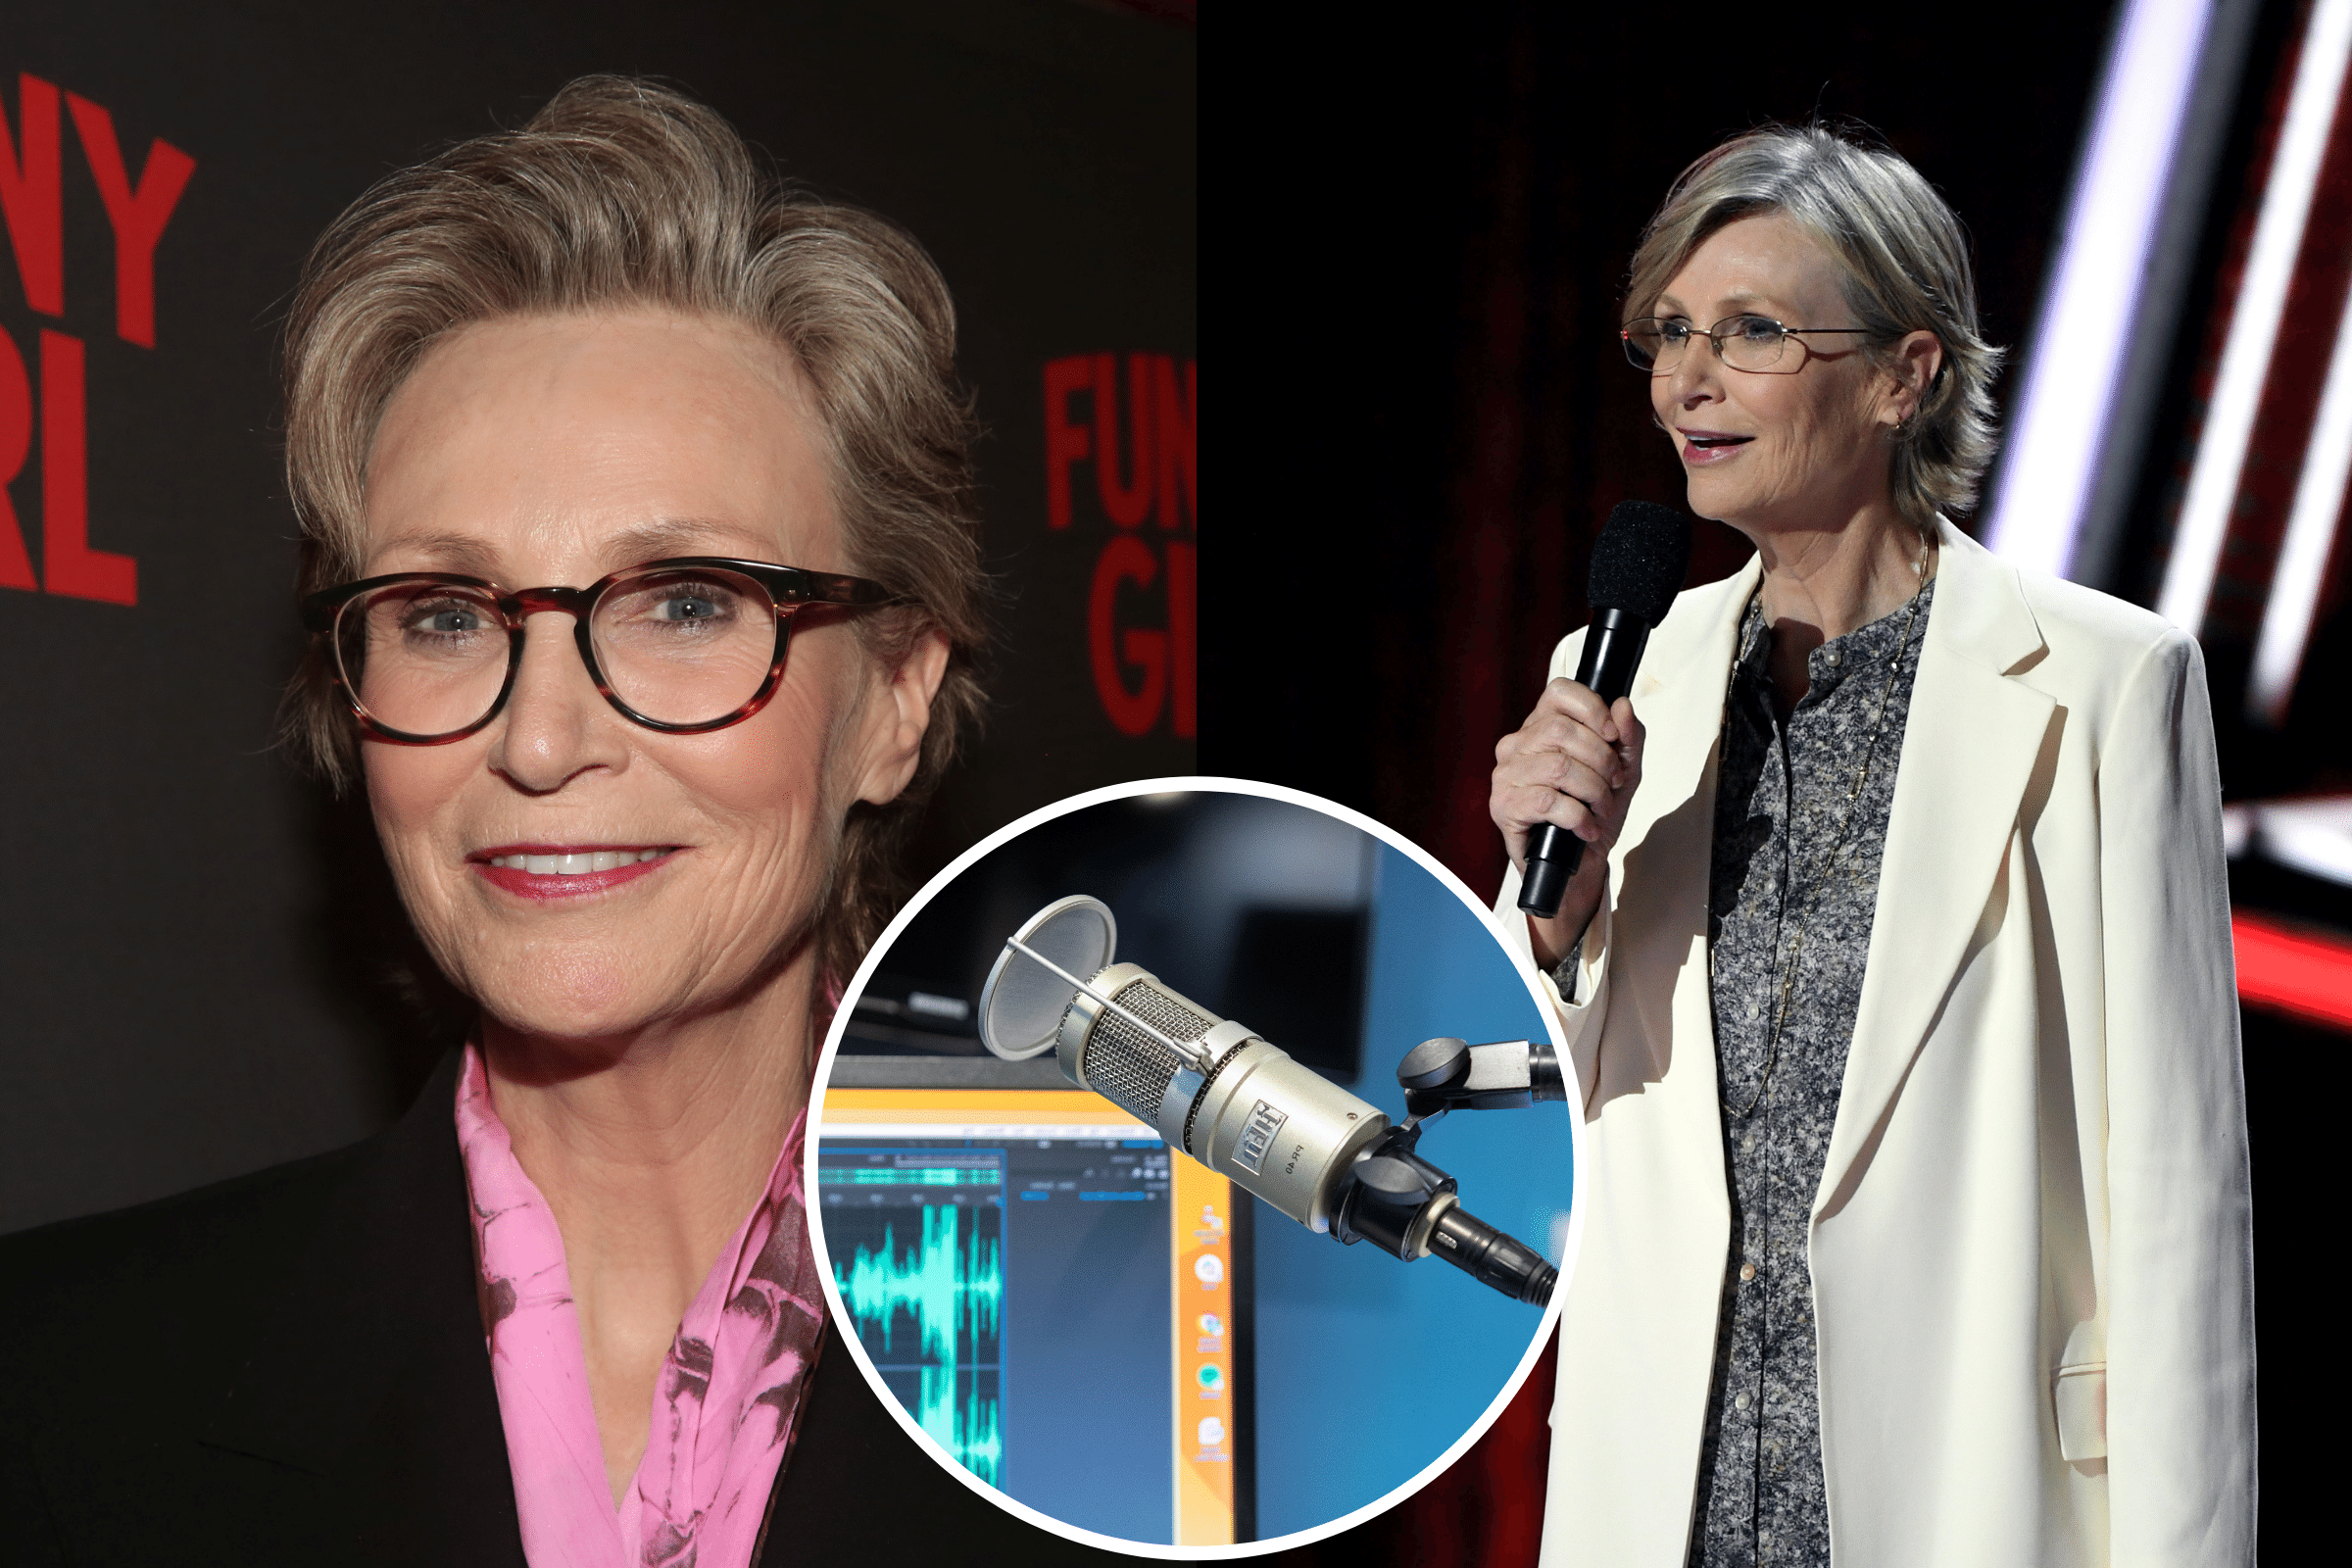 jane-lynch-slammed-for-suggesting-women-s-voices-too-high-on-podcasts